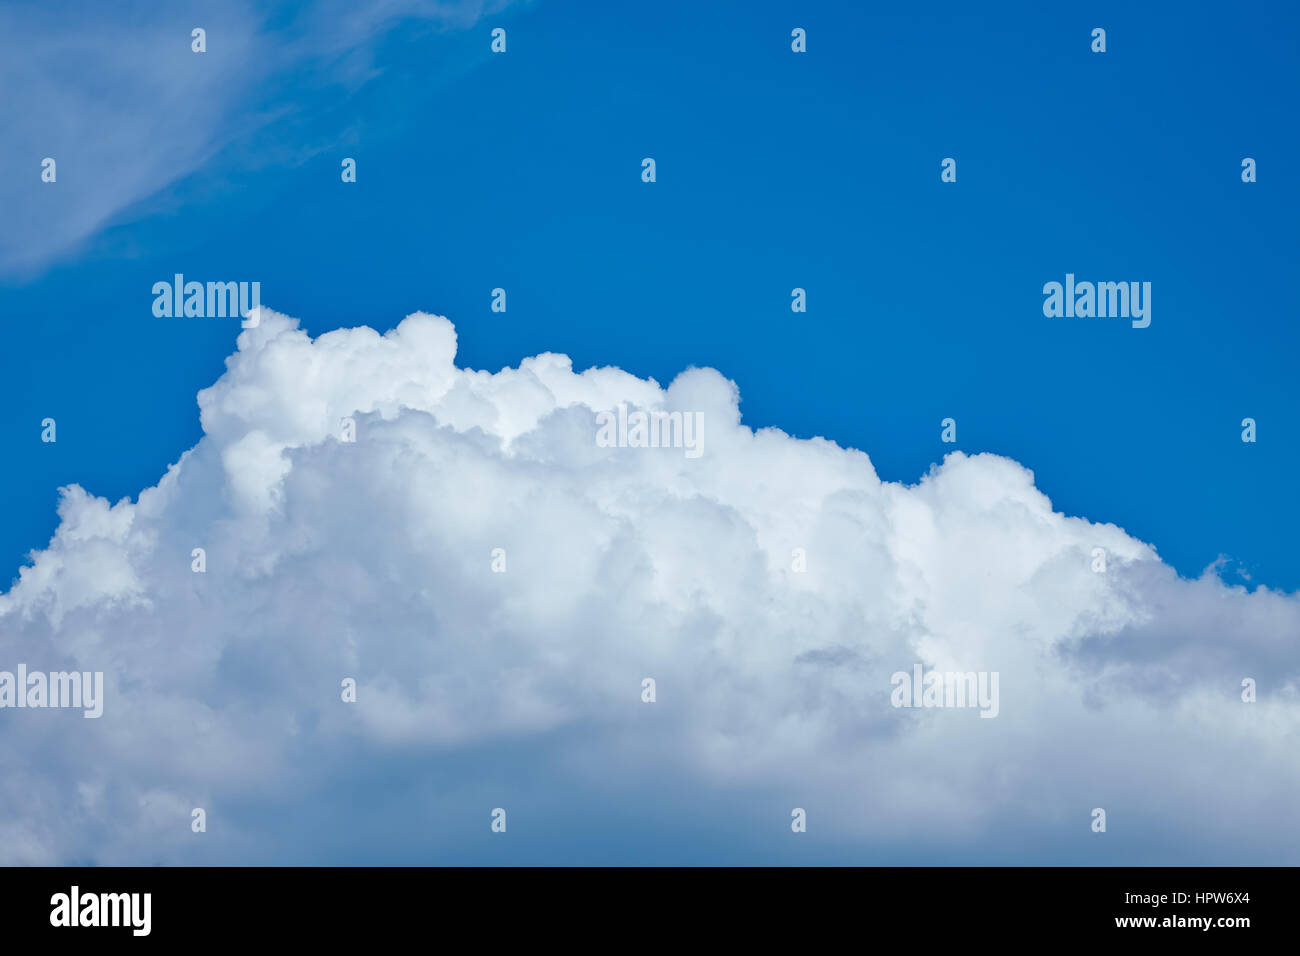 Fluffy white cloud cover in a blue sky Stock Photo